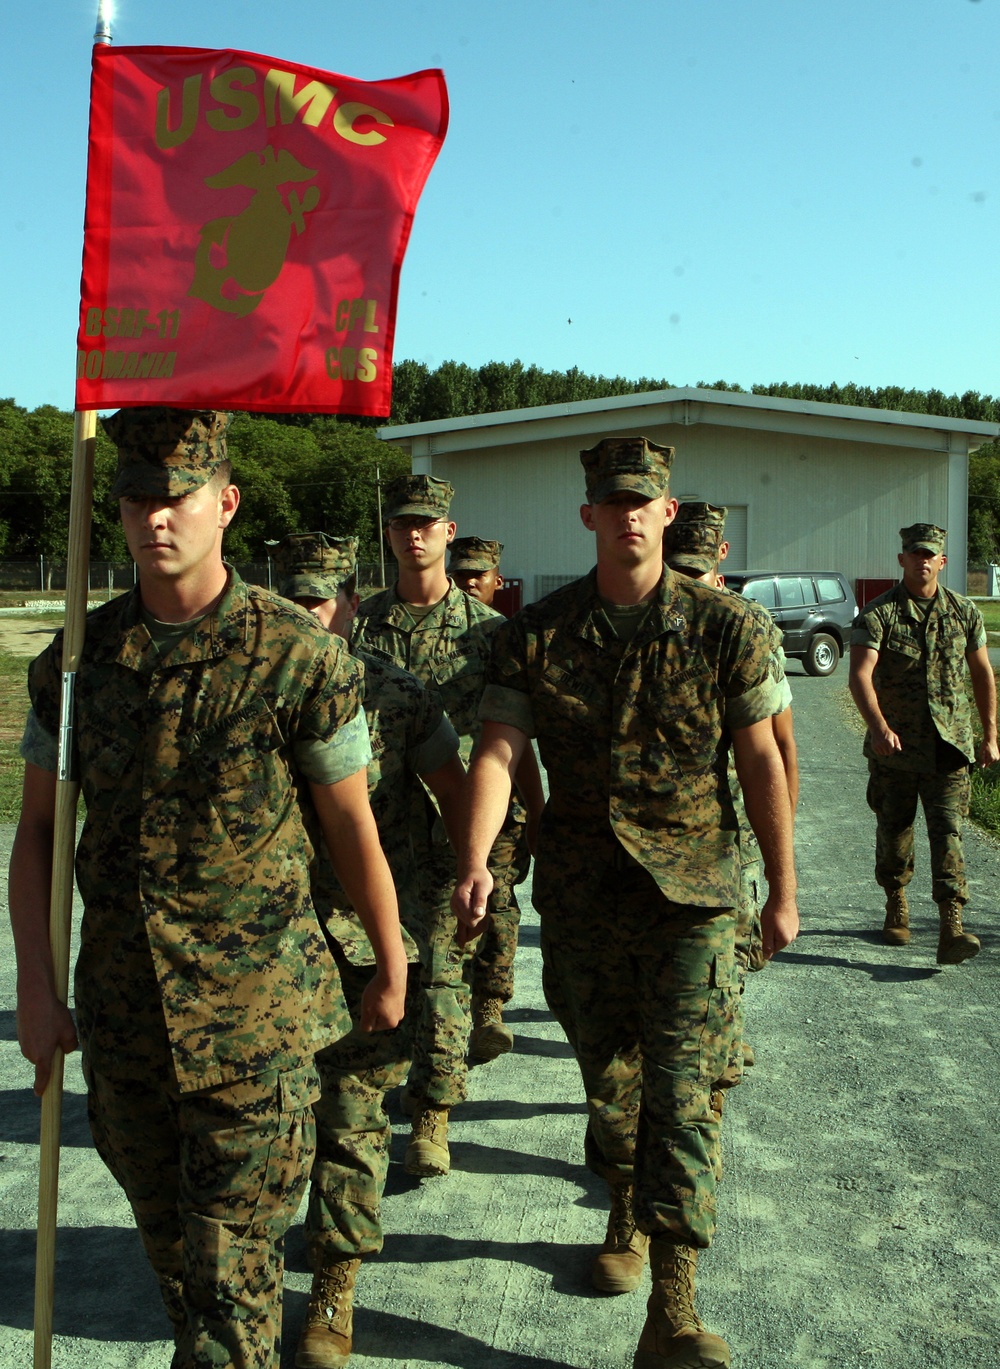 Black Sea Marines shows what it takes to be a Marine